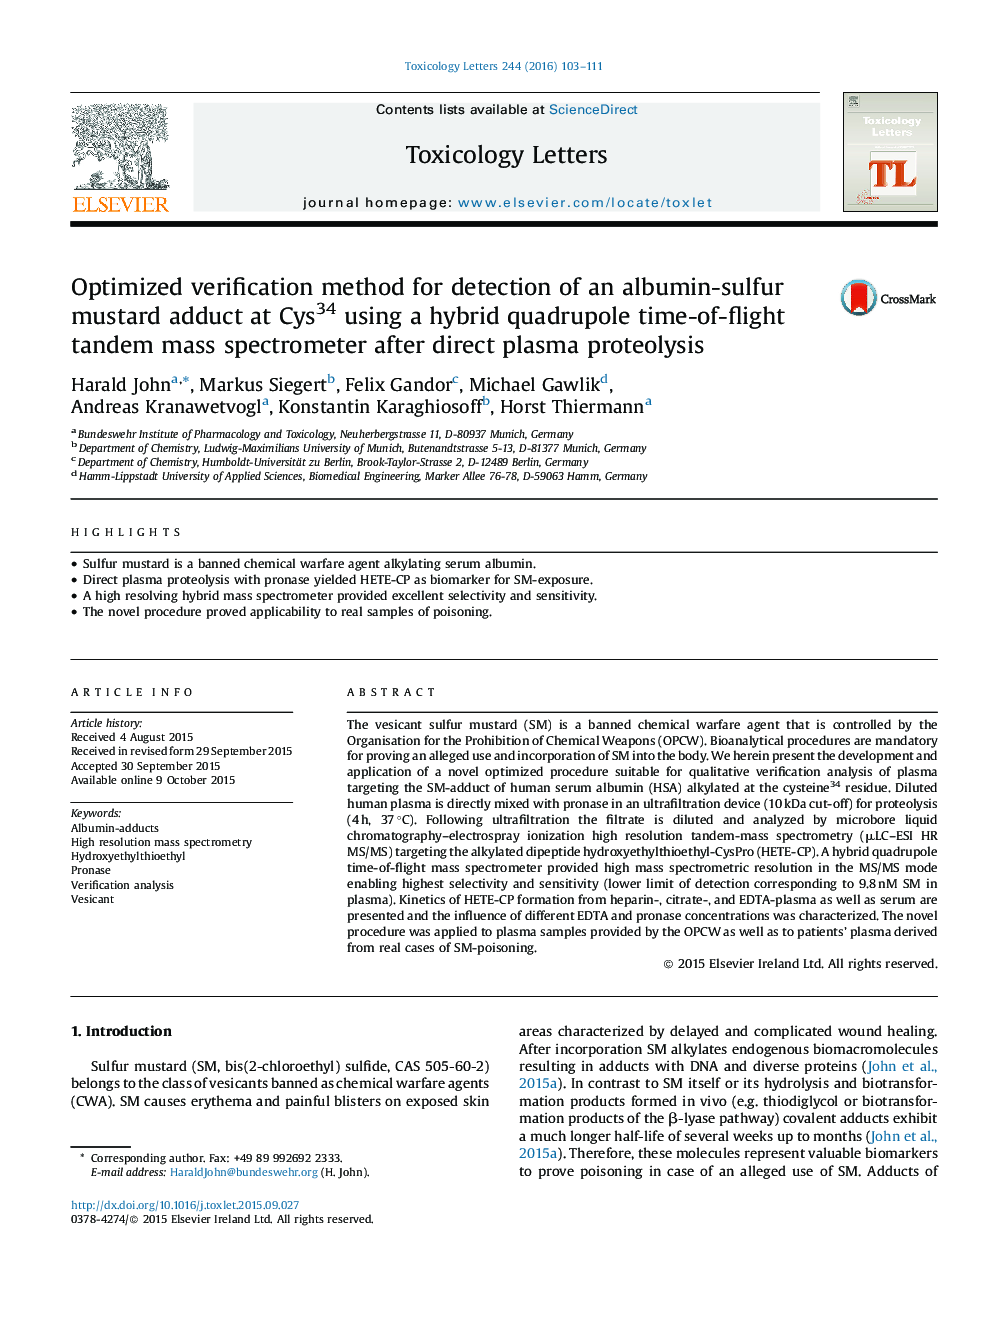 Optimized verification method for detection of an albumin-sulfur mustard adduct at Cys34 using a hybrid quadrupole time-of-flight tandem mass spectrometer after direct plasma proteolysis